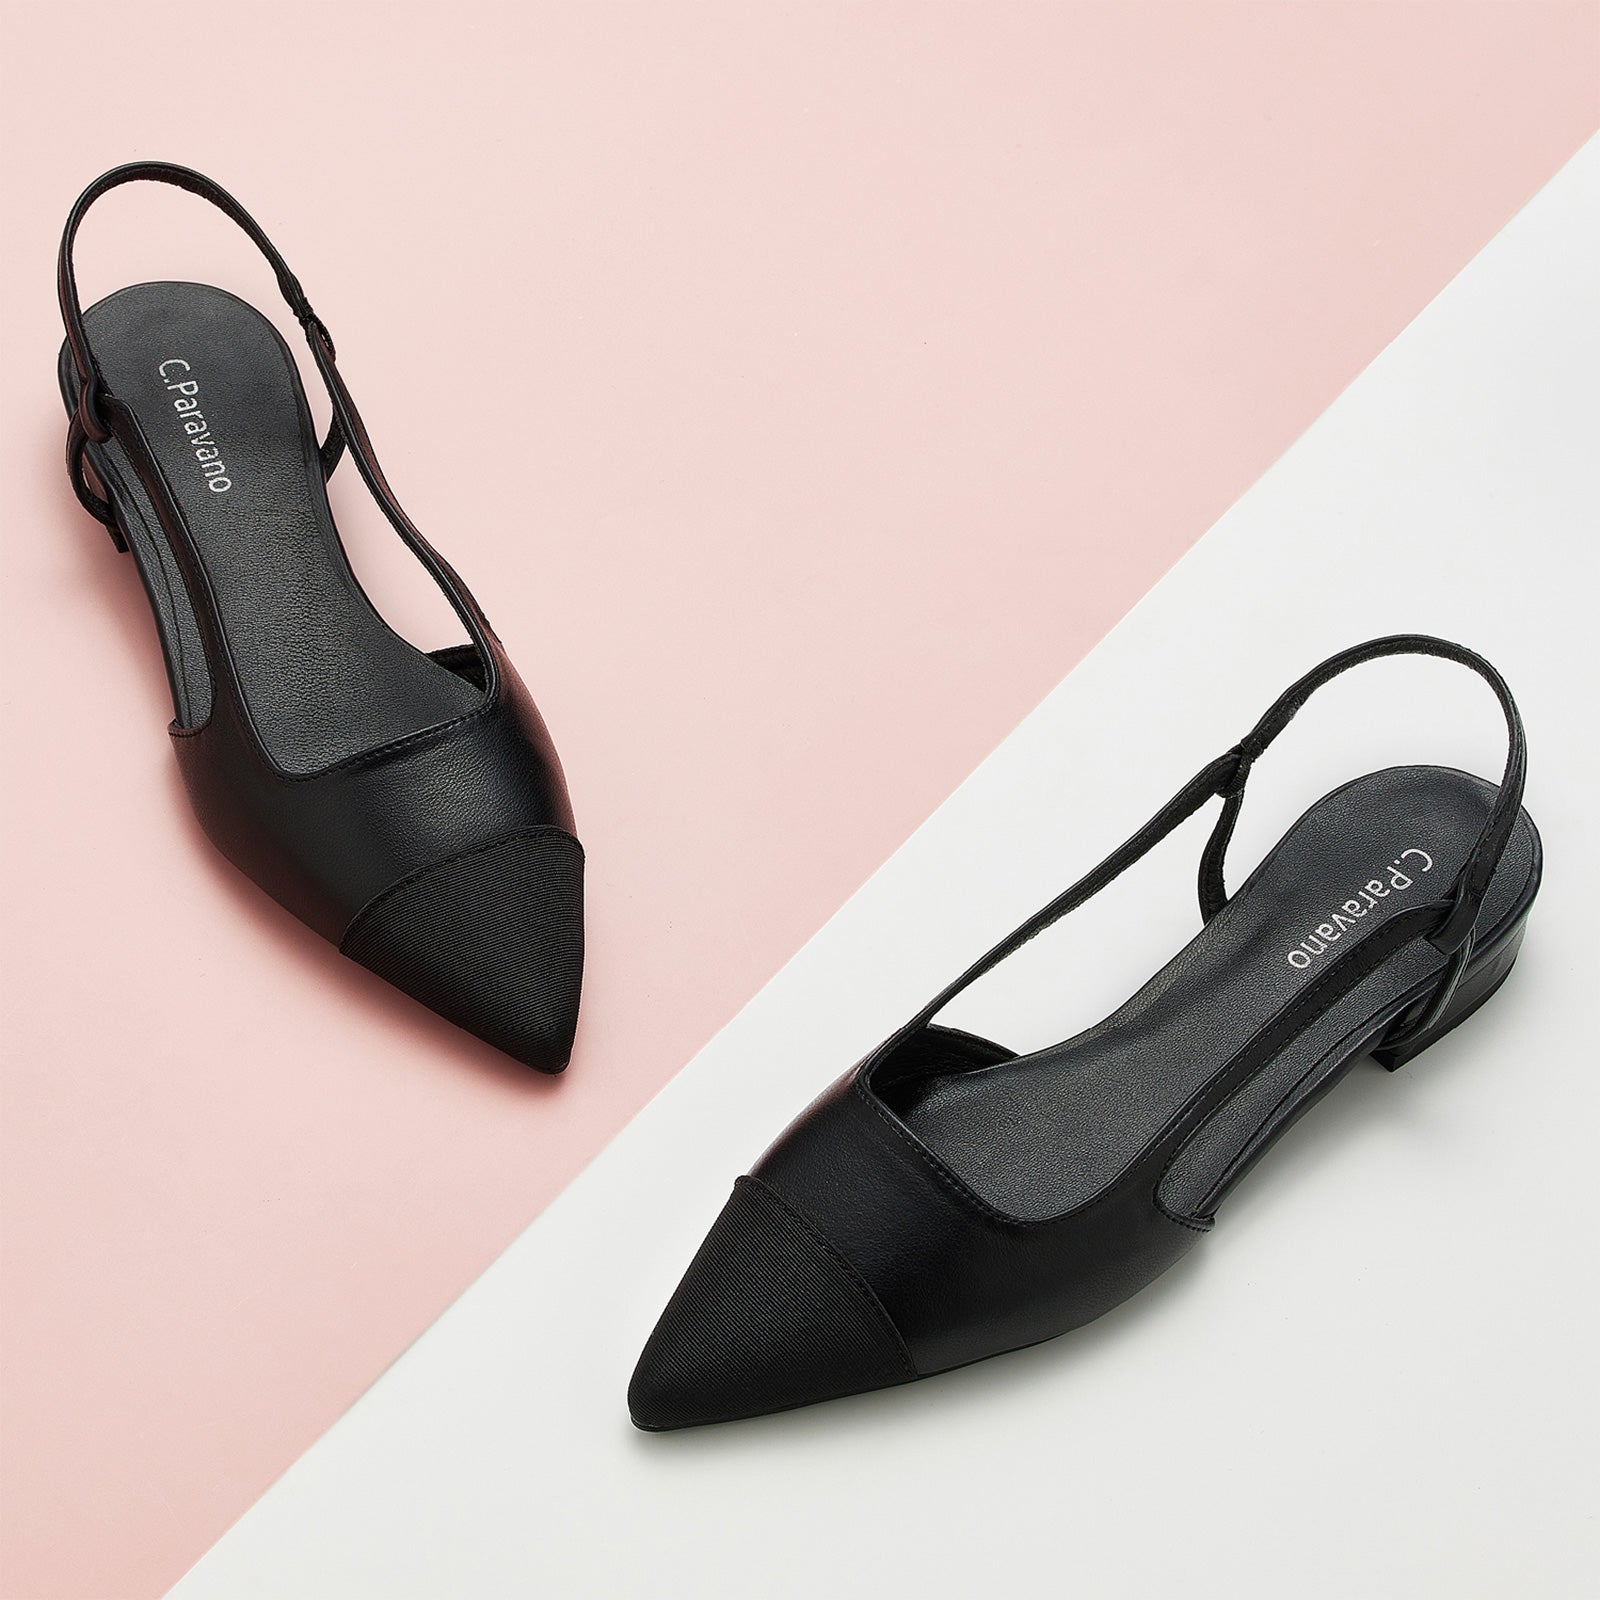 Urban Sophistication: Black Elegant Pointe Toe Slingback Flats, a modern and edgy choice for city styling with timeless appeal